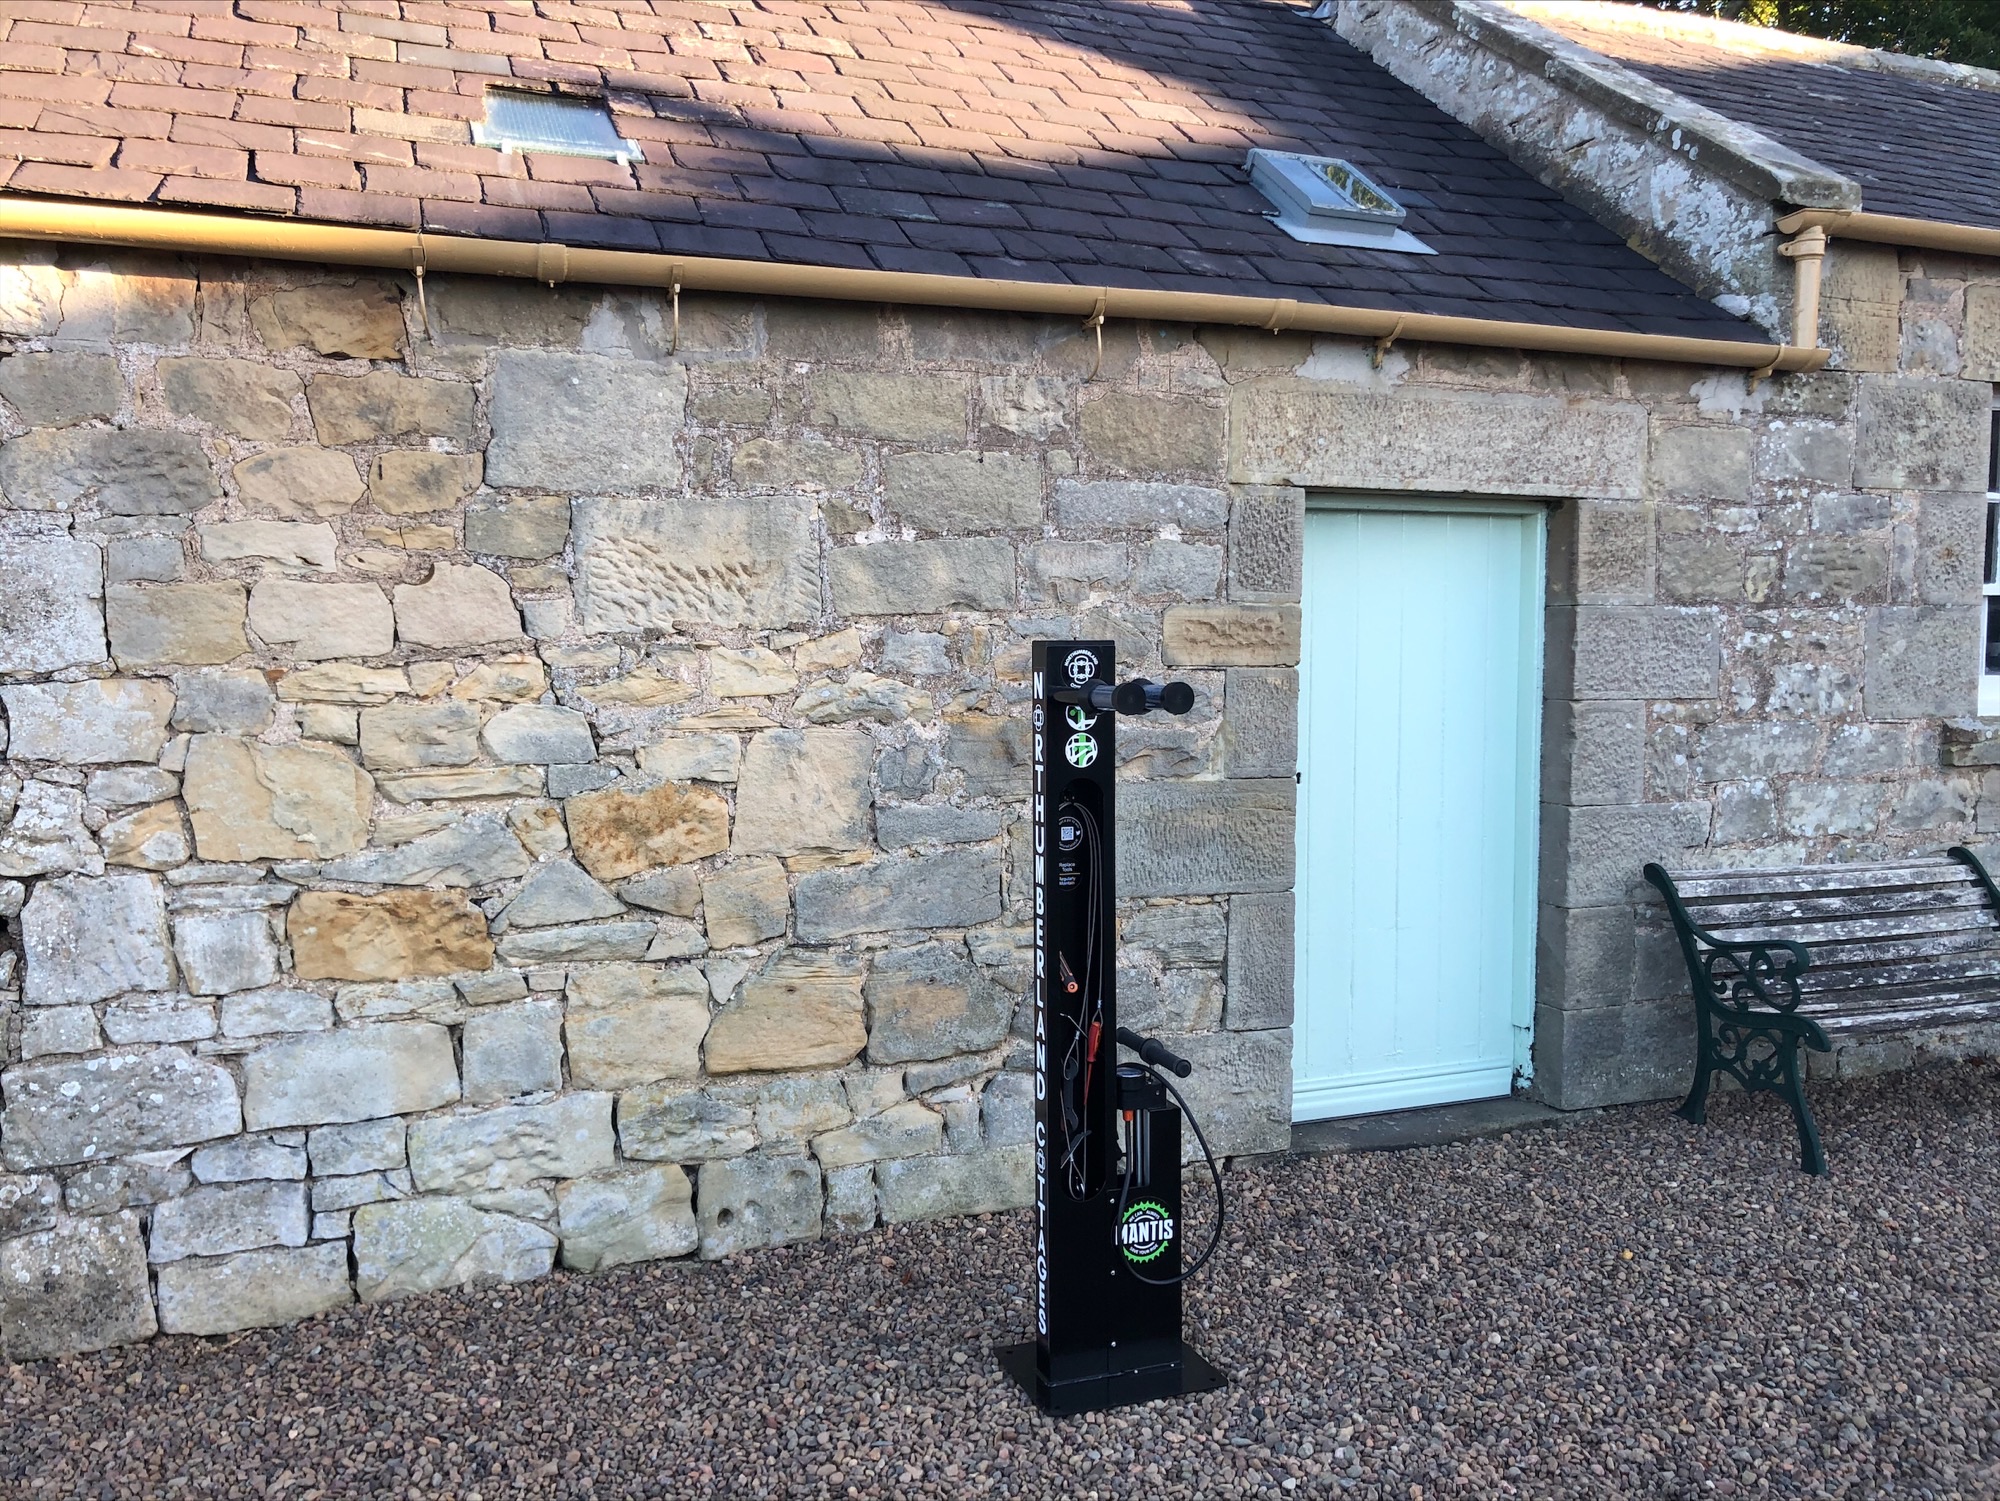 Northumberland Cottages newly installed Mantis Bike Repair Stand, with custom branding. Located outdoors and ready for its intended use.